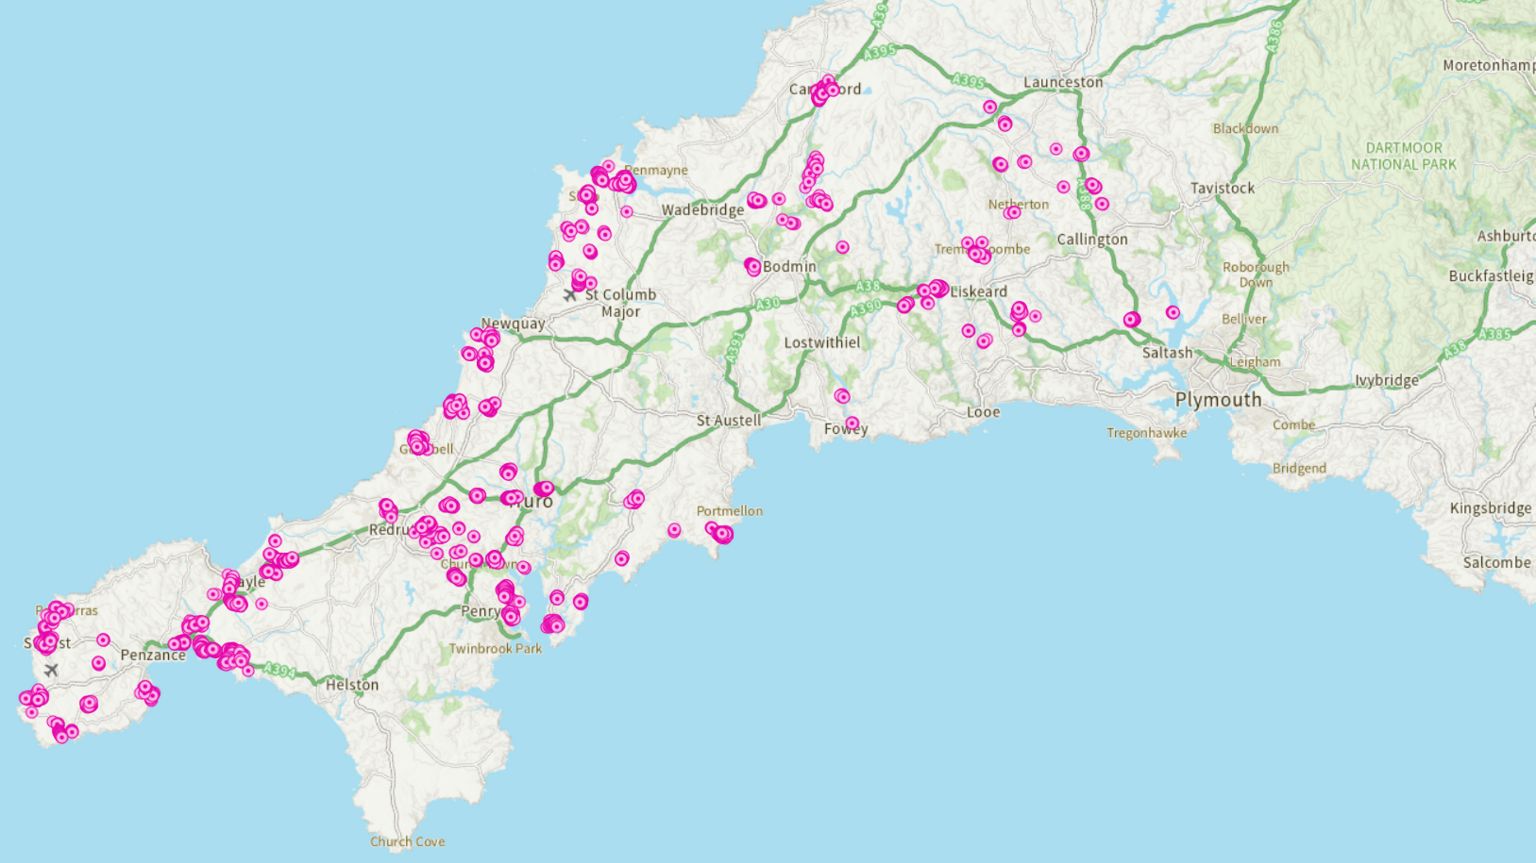 The interactive map showing which areas of Cornwall have streetlights being switched off or dimmed